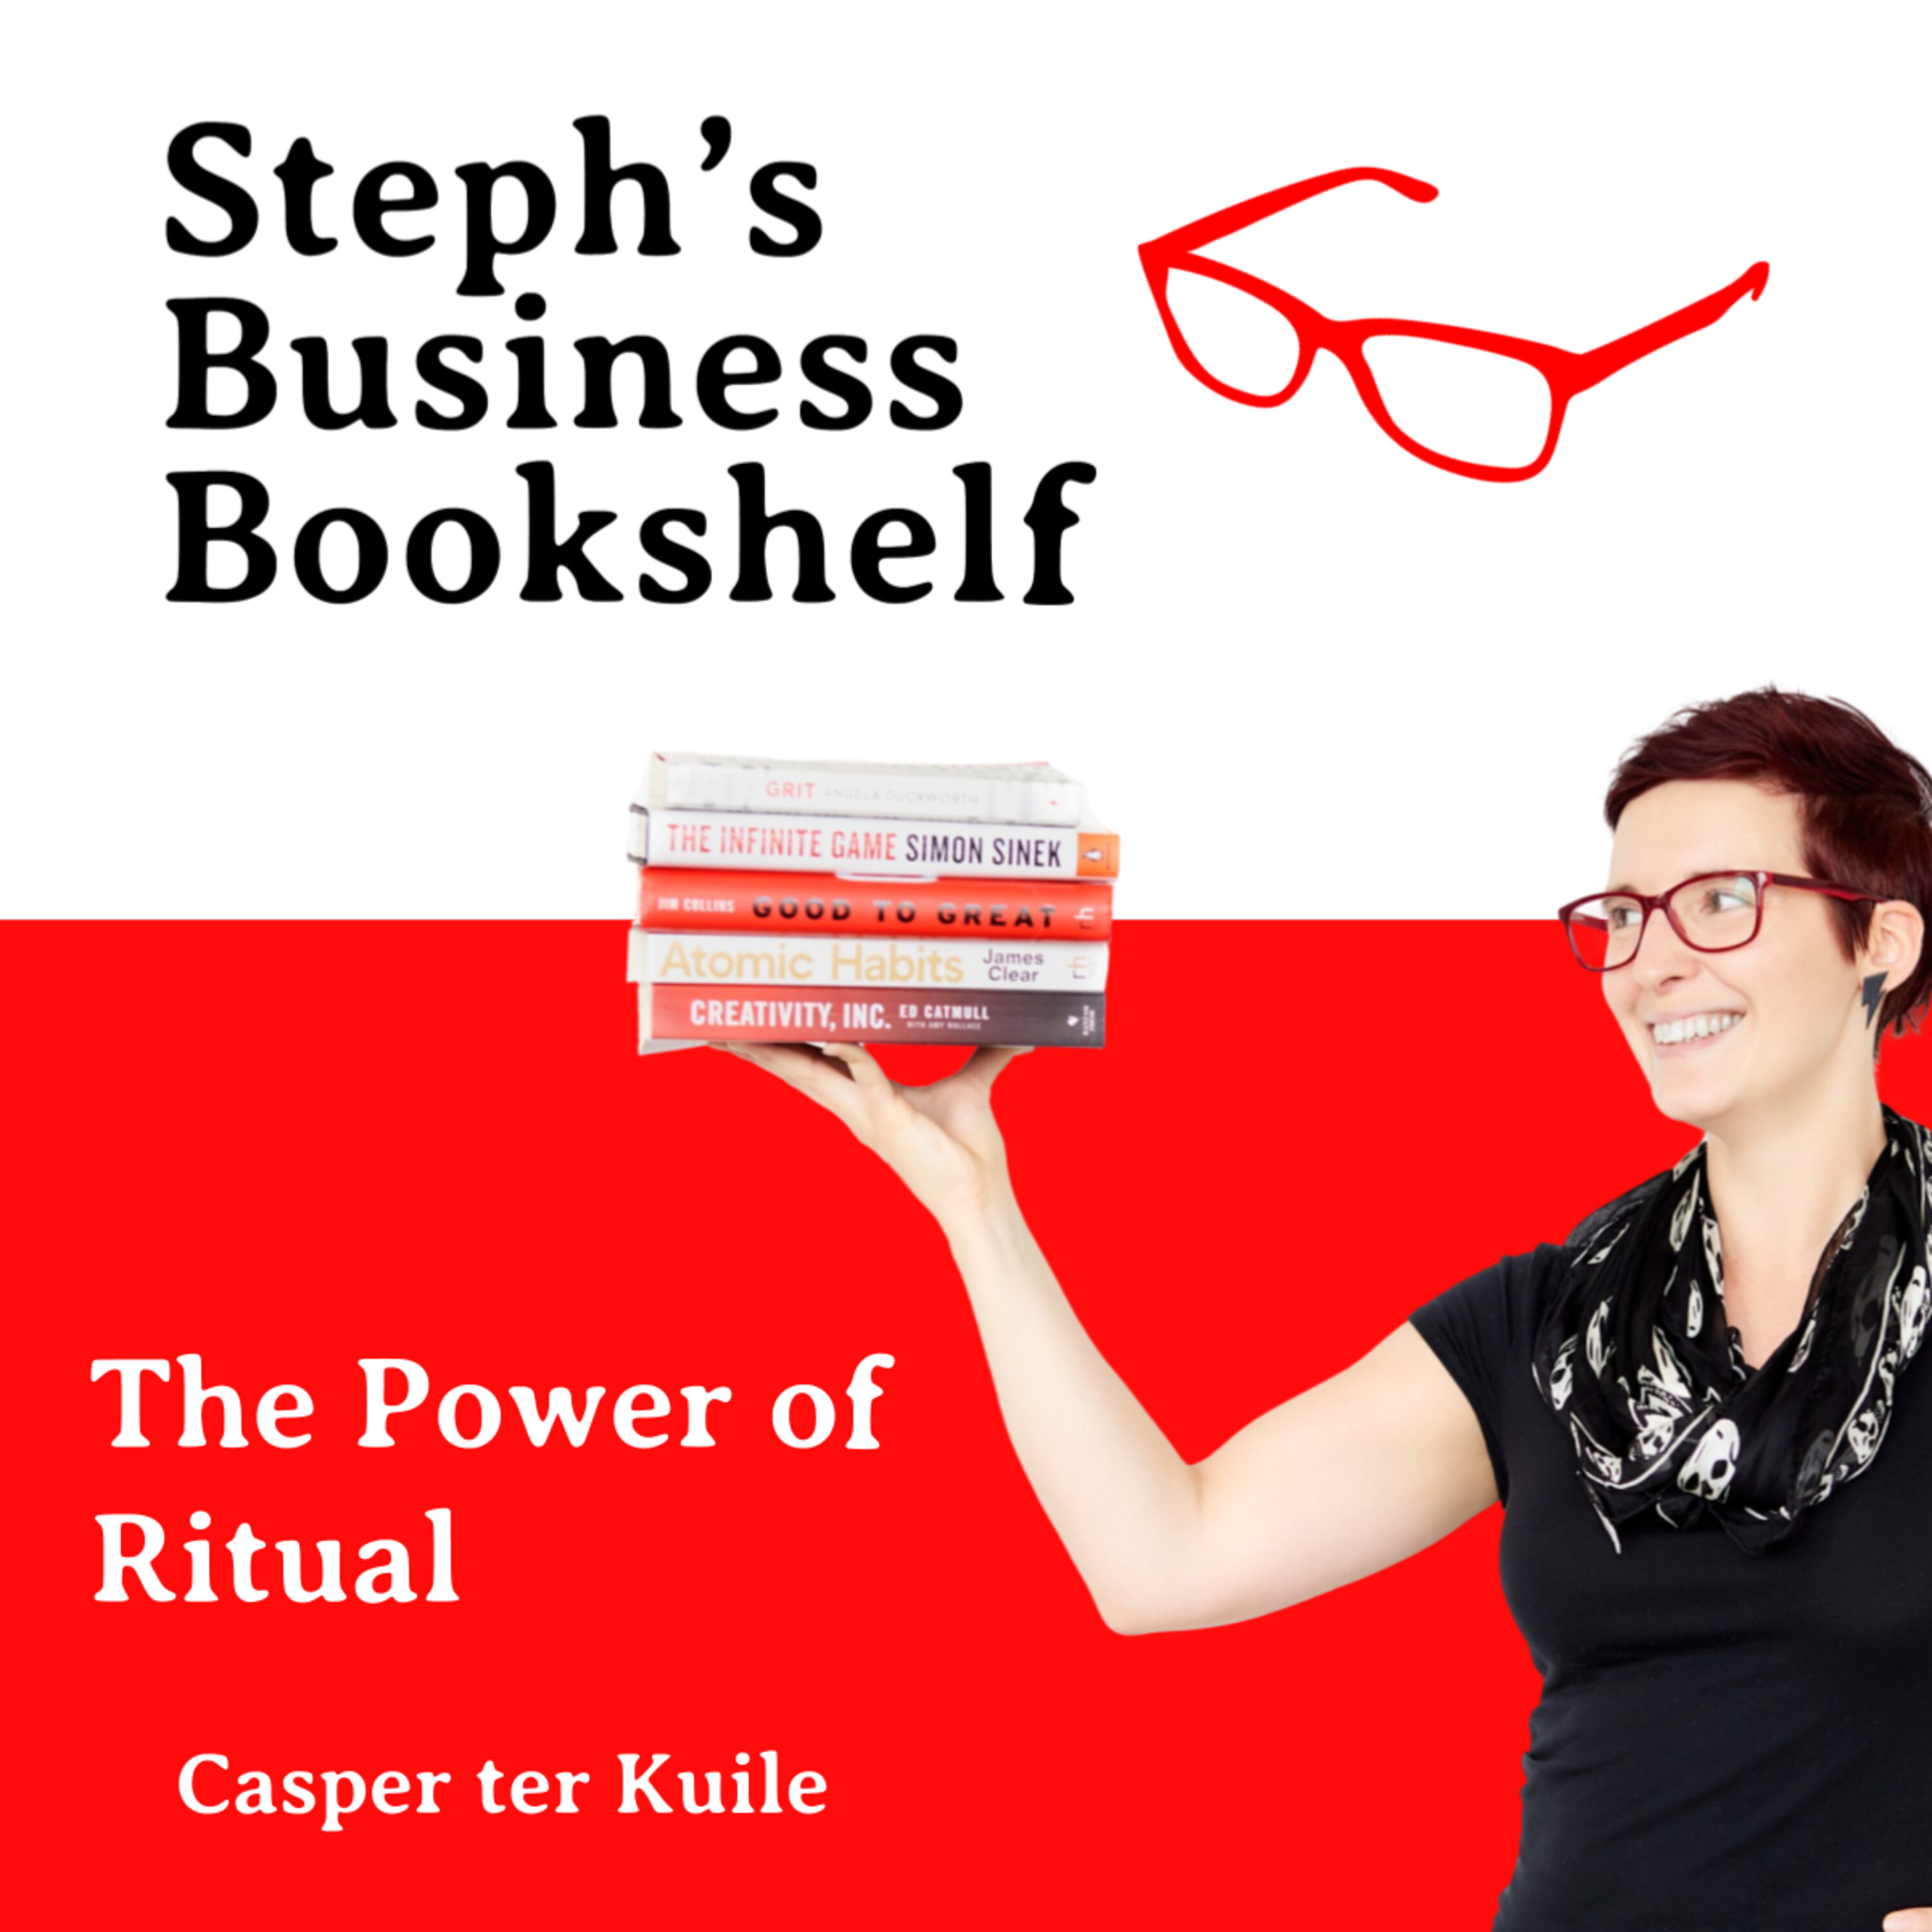 The Power of Ritual by Casper ter Kuile: how wizards and gyms will make you more spiritual Image